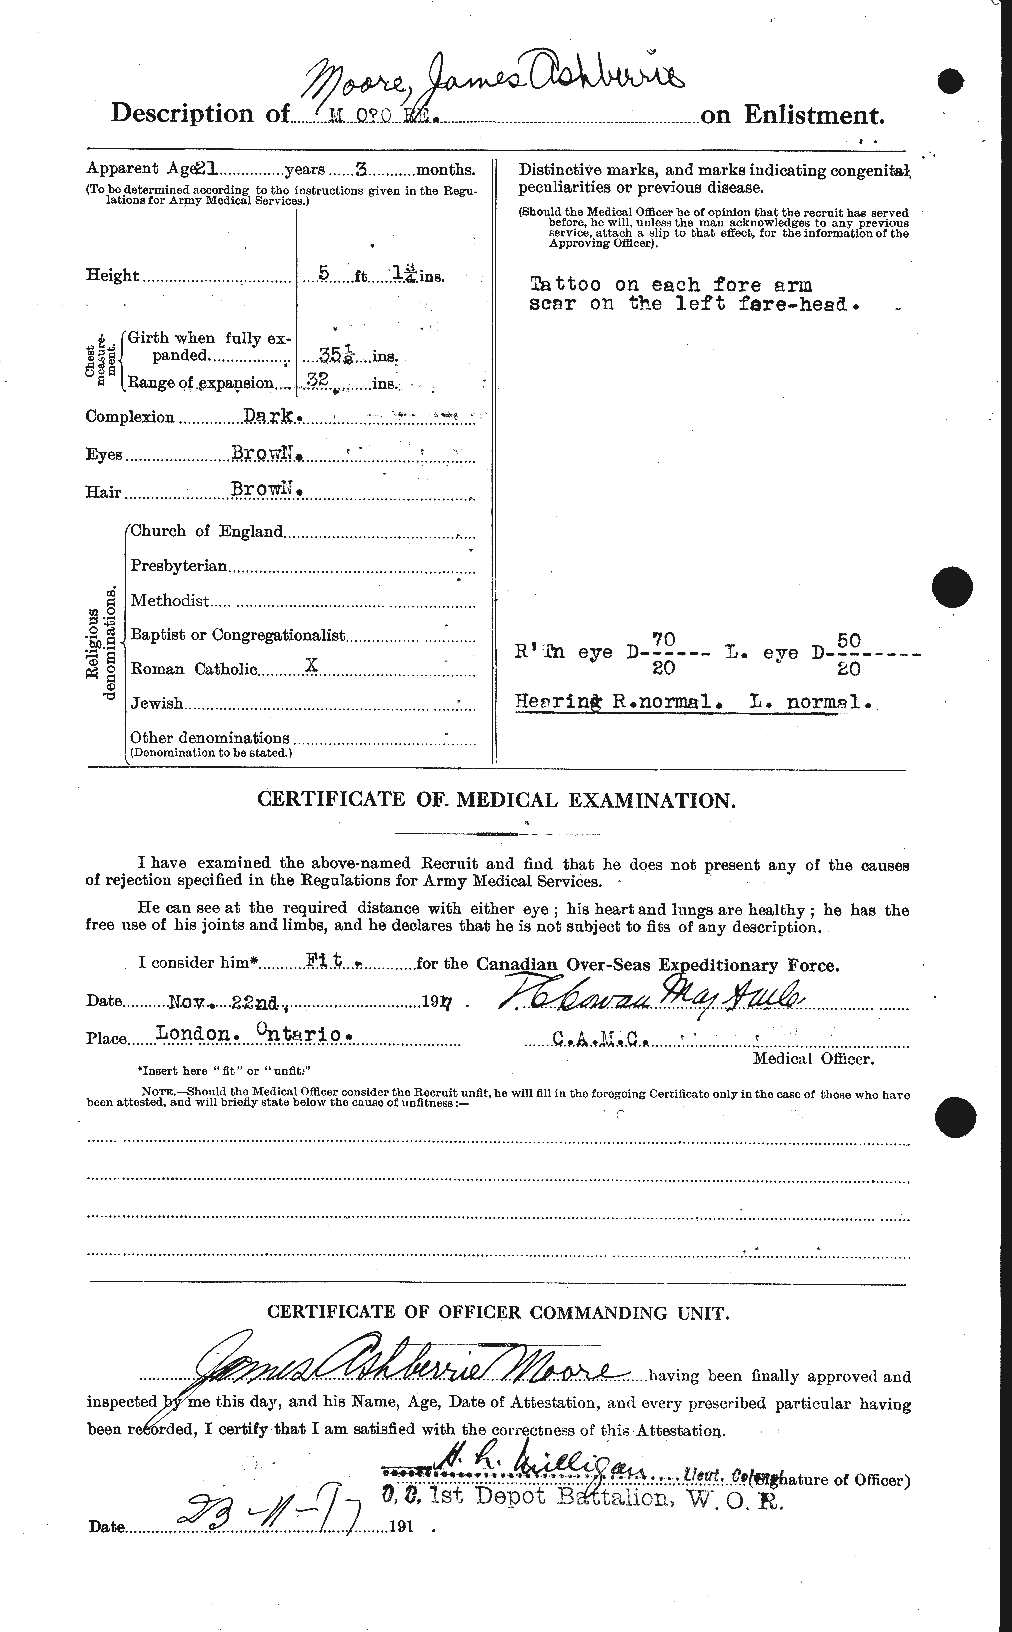 Personnel Records of the First World War - CEF 502207b